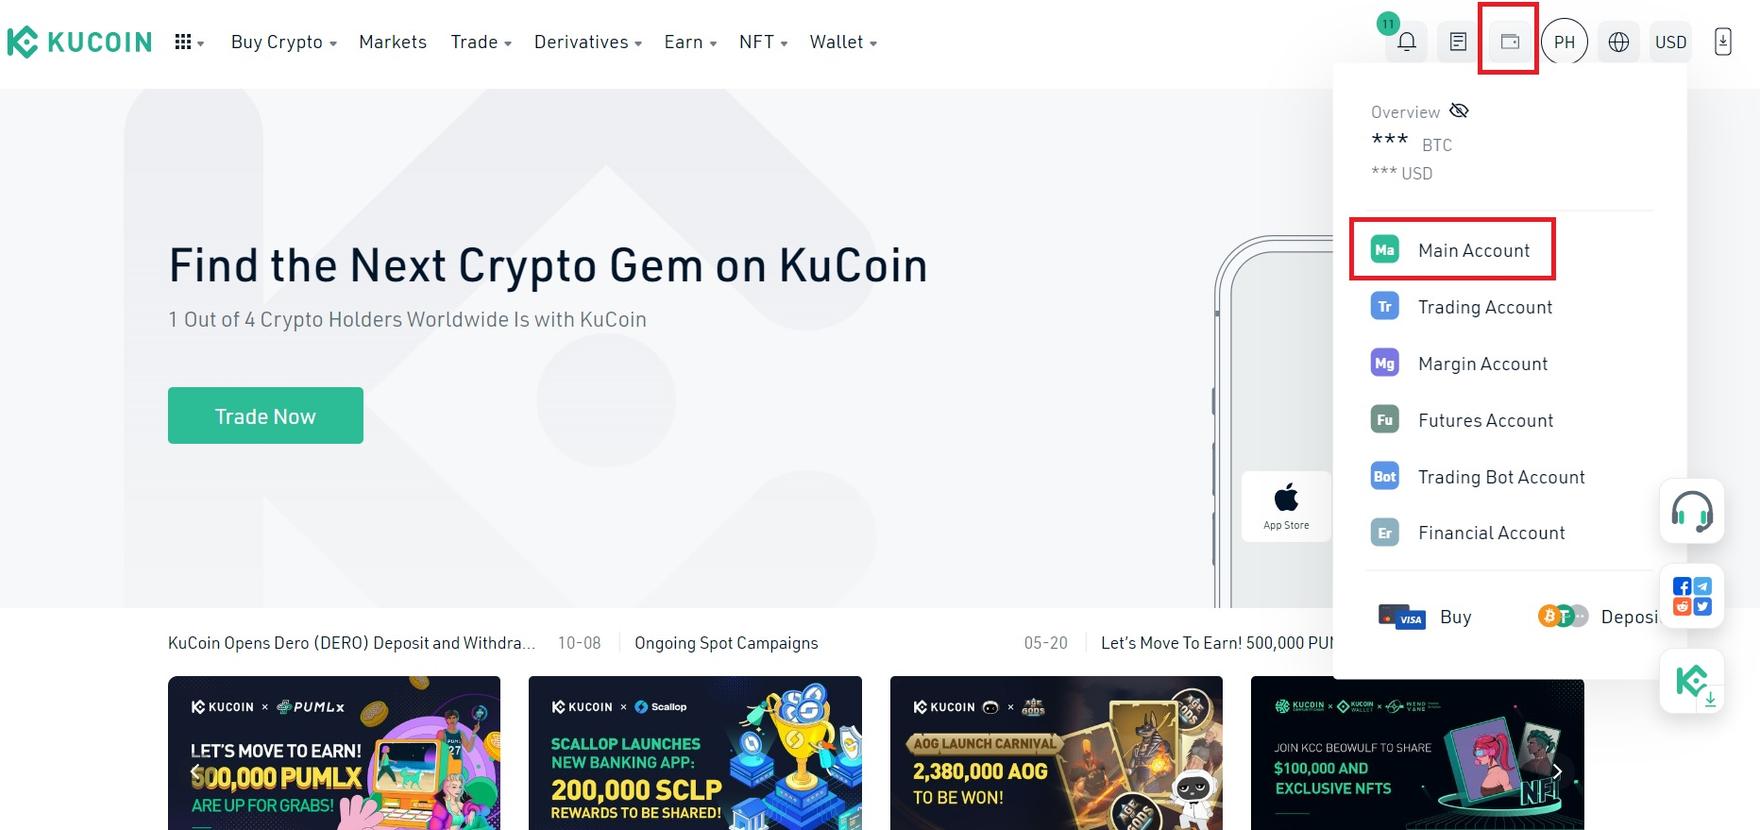 kucoin expensice withdraw